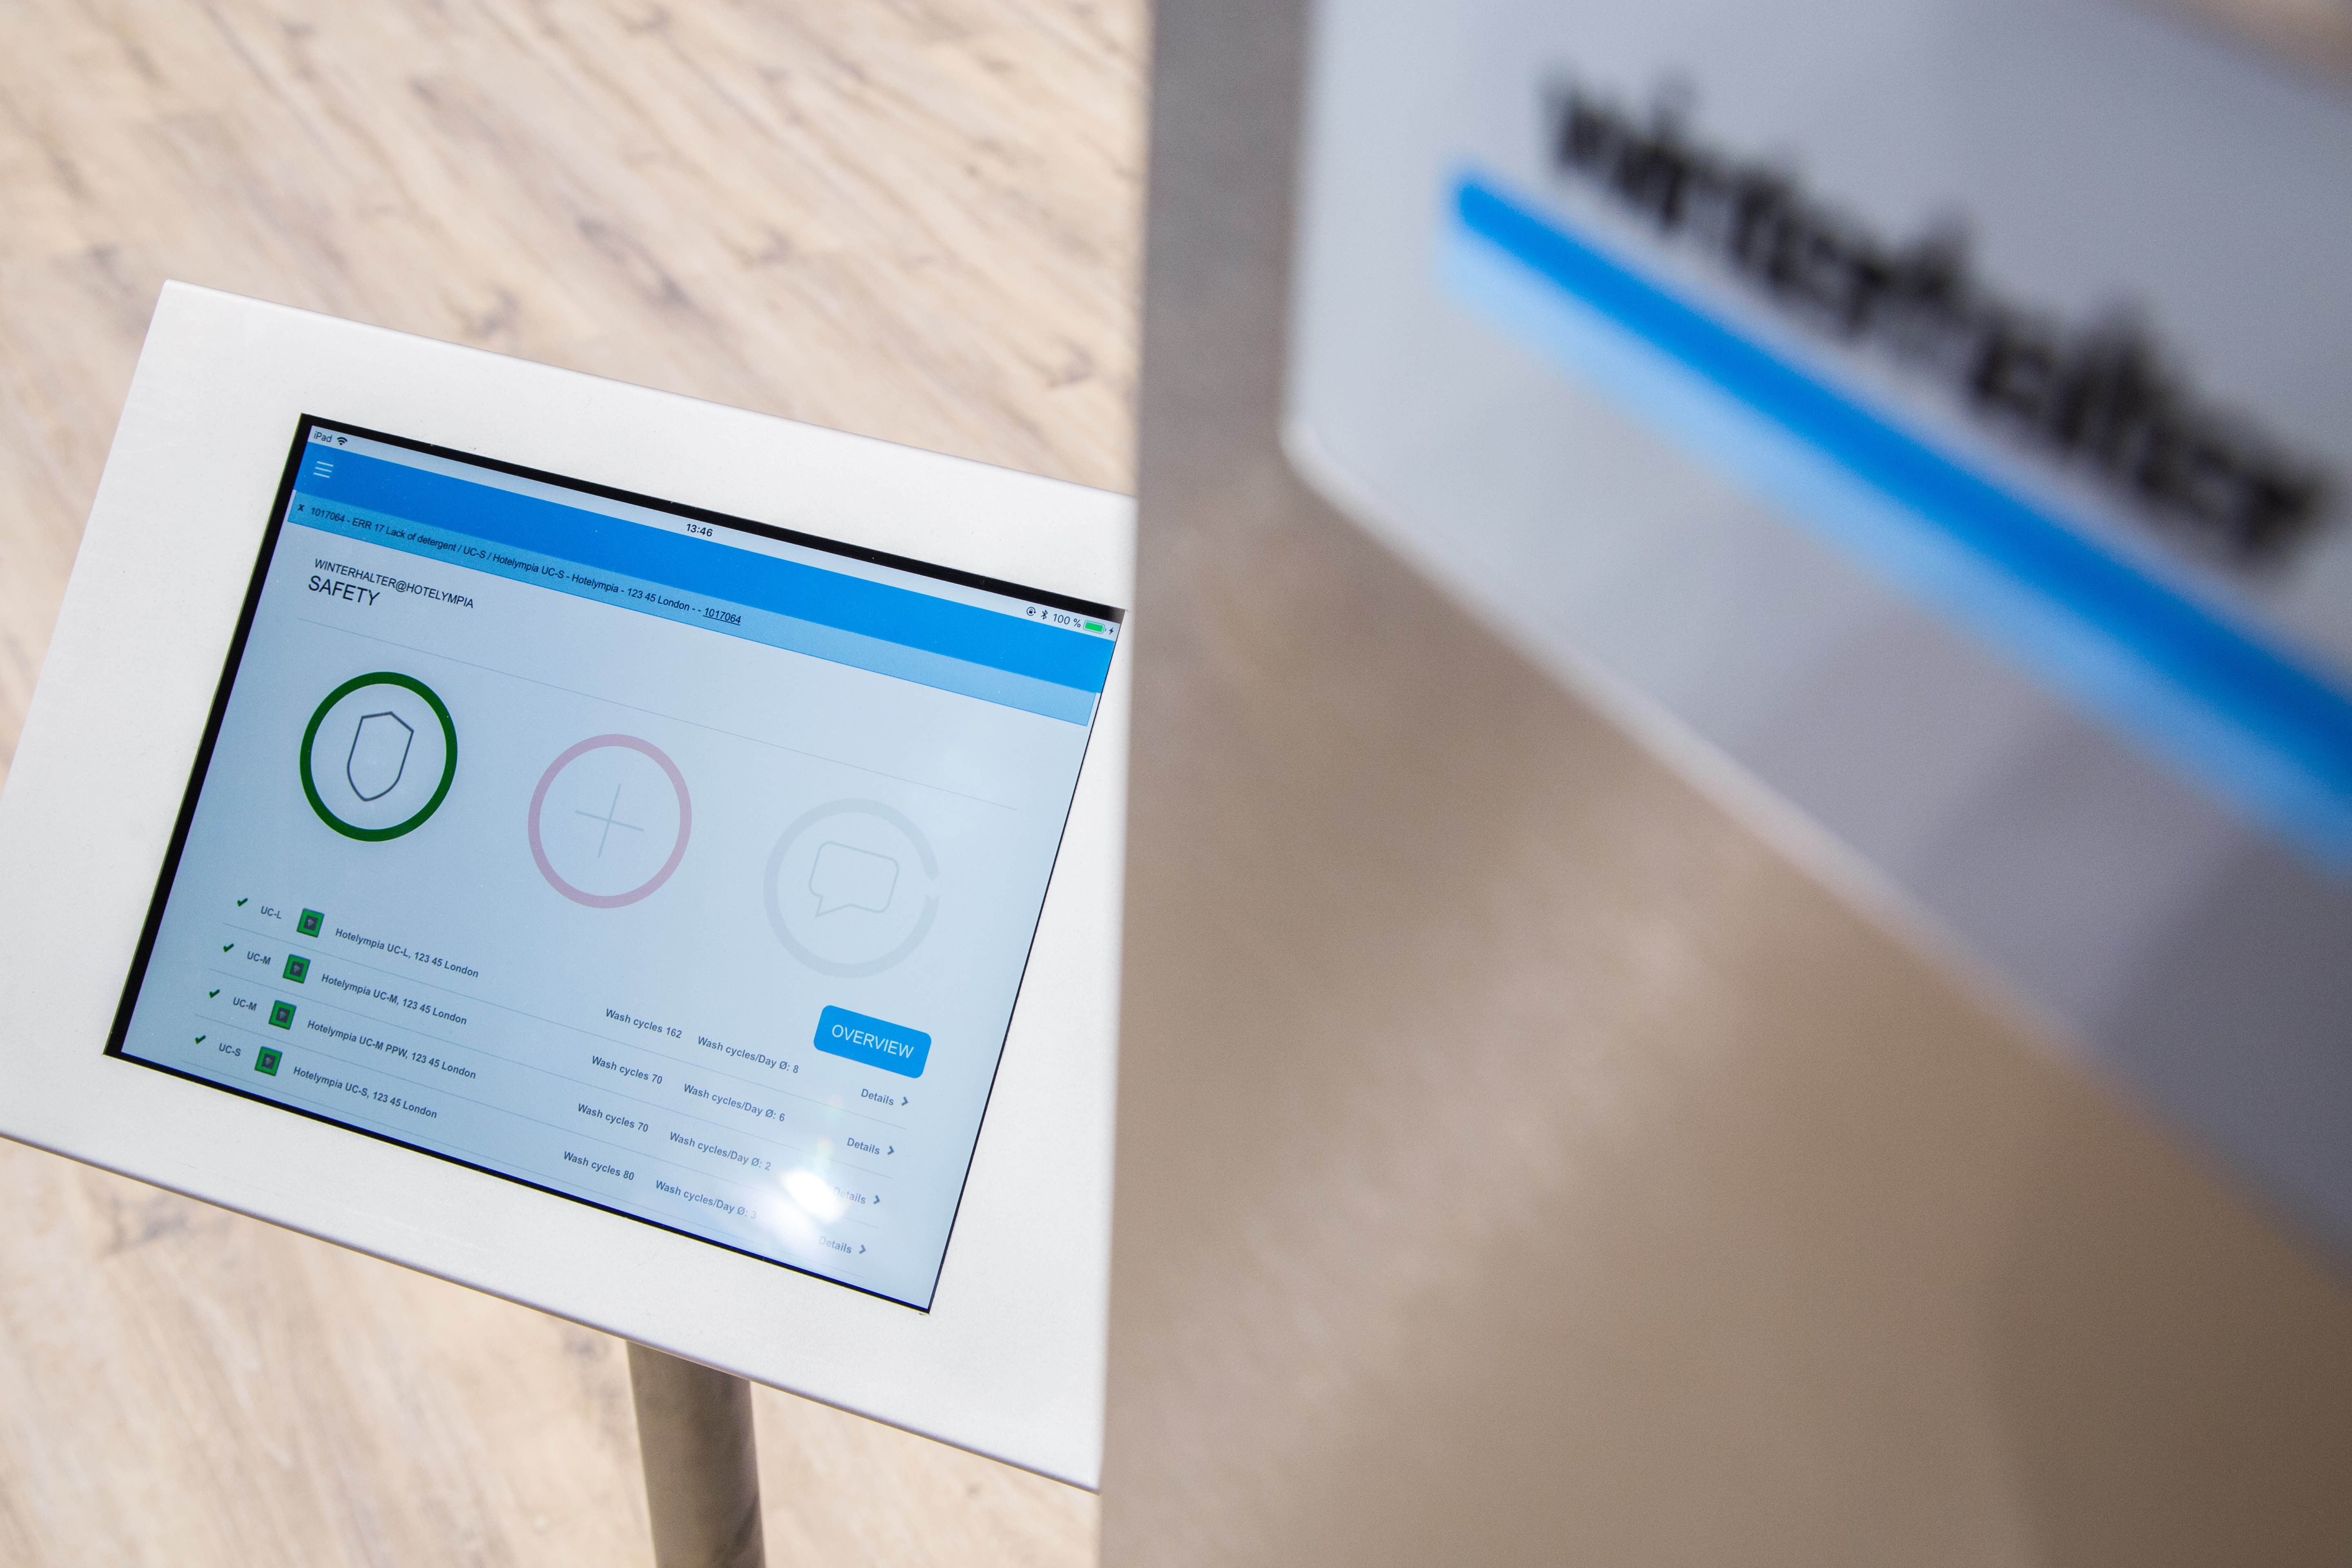 Winterhalter’s Connected Wash dashboard can monitor dishwashers remotely’